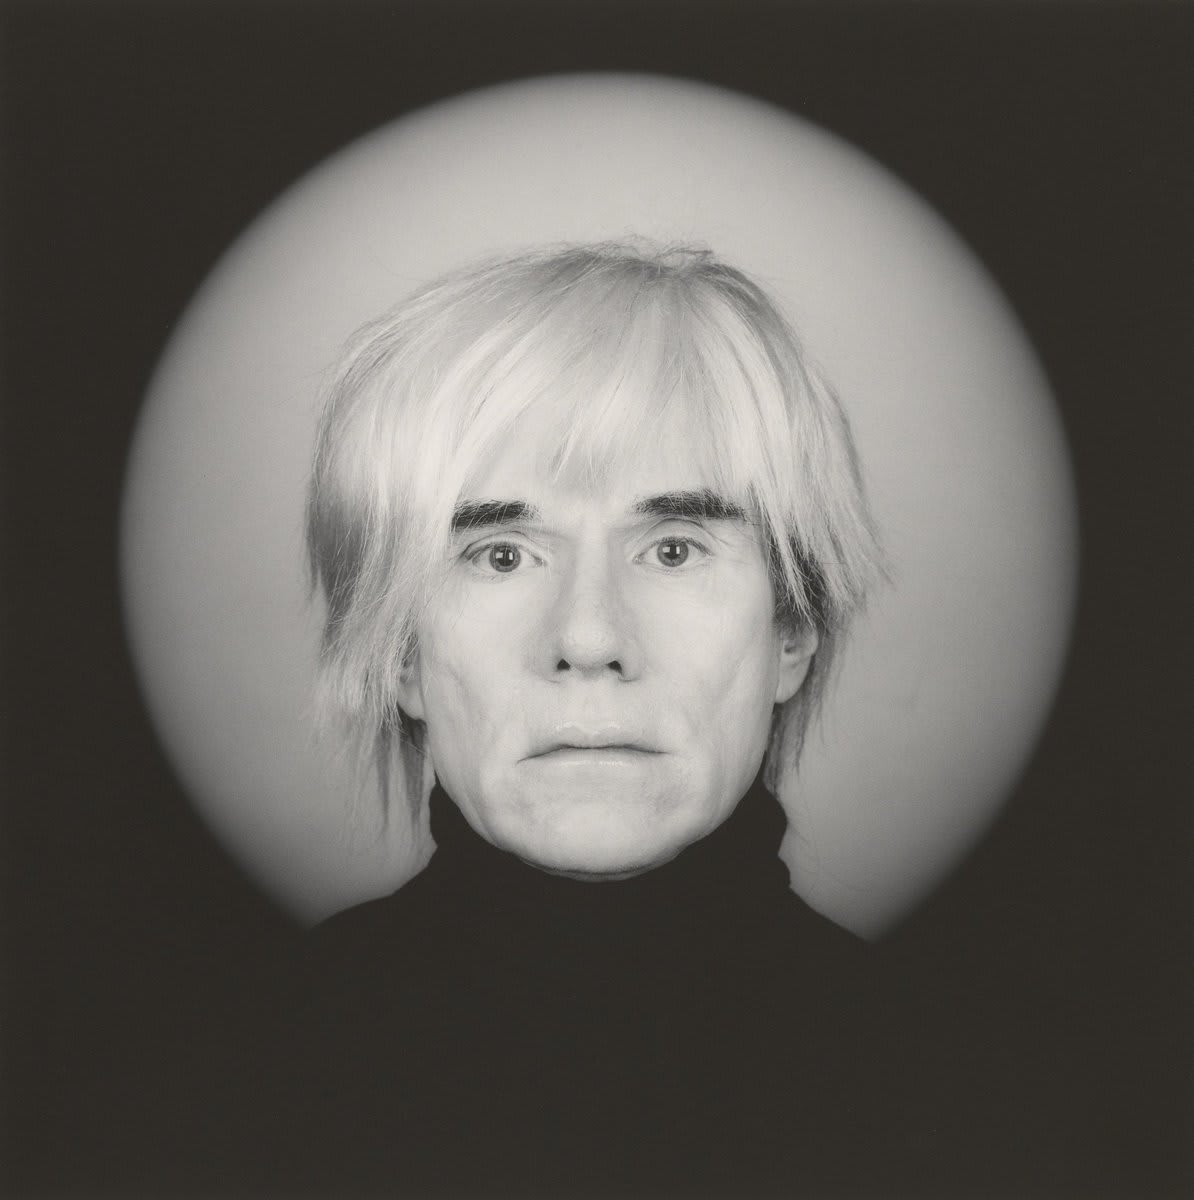 "If you want to know all about Andy Warhol, just look at the surface of my paintings and films and me, and there I am. There’s nothing behind it." Happy birthday to Andy Warhol, born OnThisDay in 1928. Robert Mapplethorpe, "Andy Warhol," 1986. © Robert Mapplethorpe Foundation